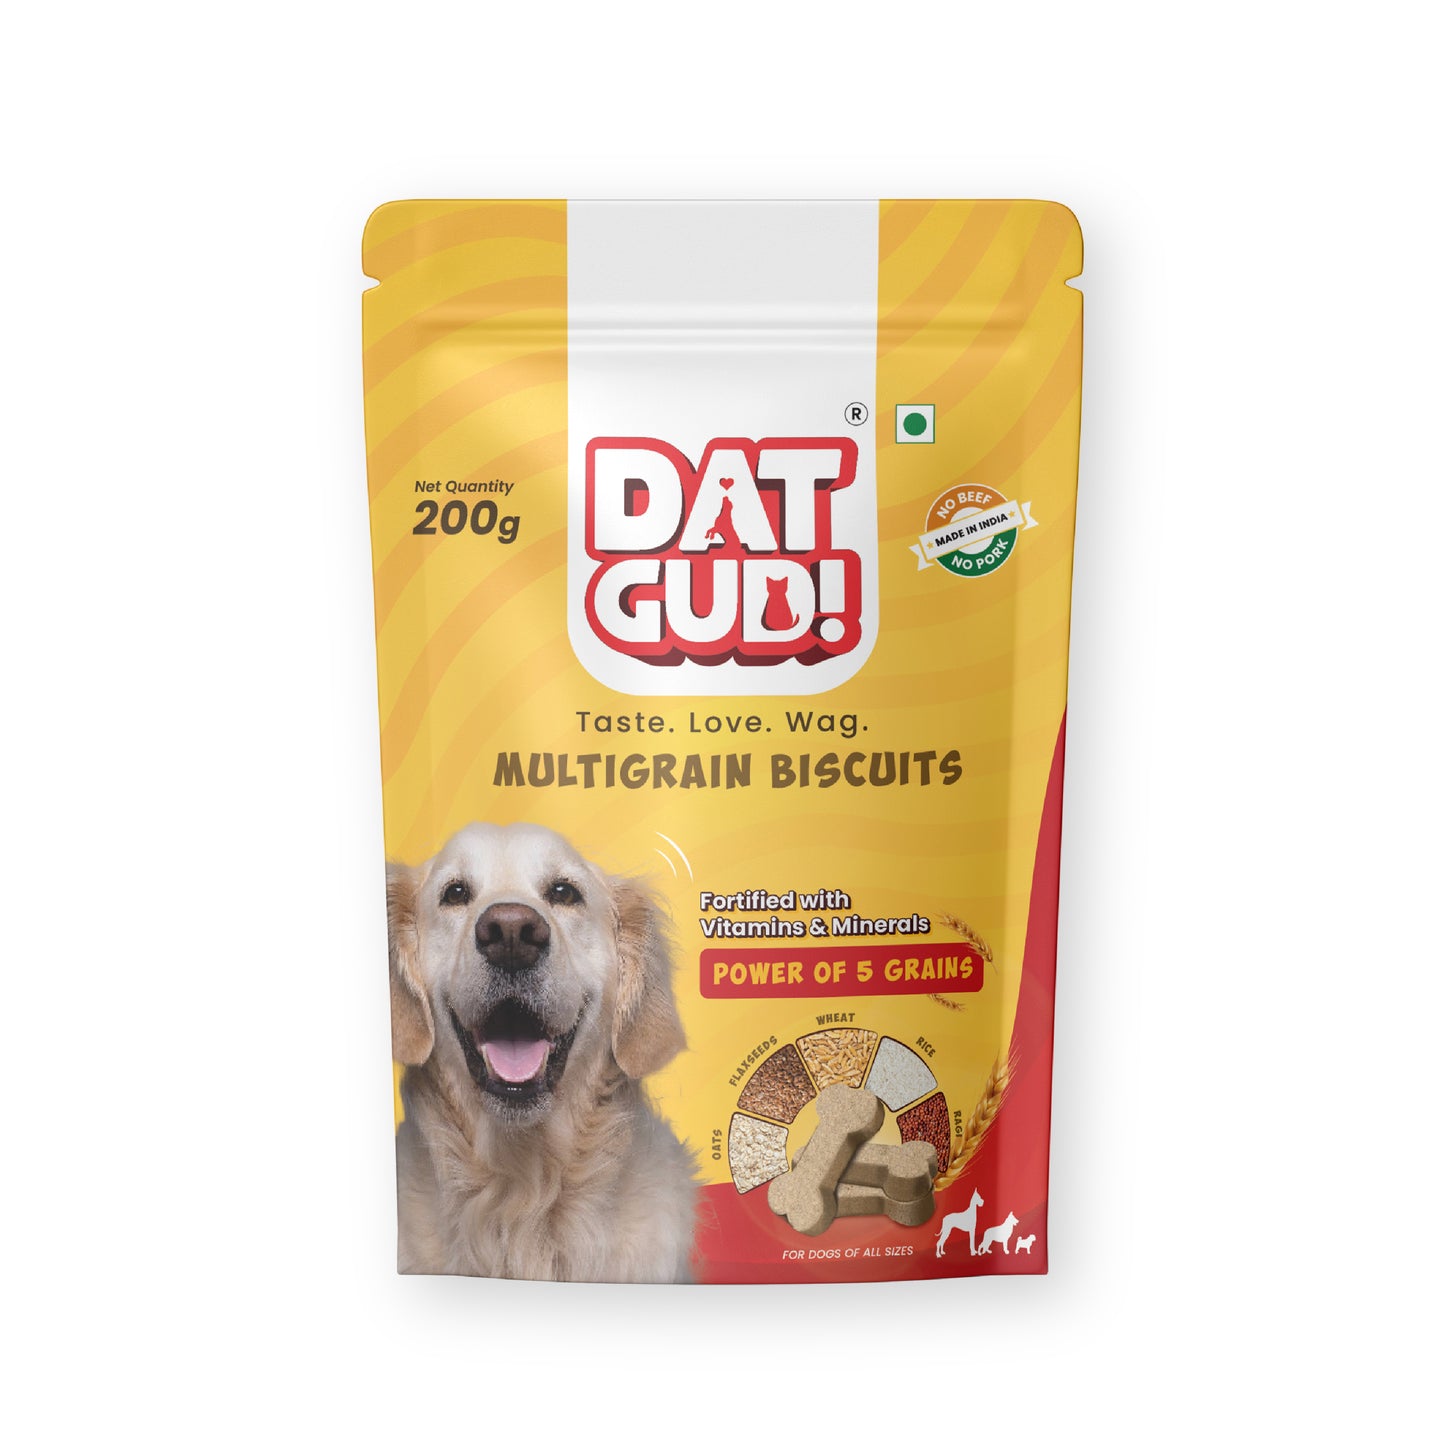 DatGud Biscuits for All Breeds, Smoky Barbeque Chicken + Calcium + Multigrain, Combo Pack